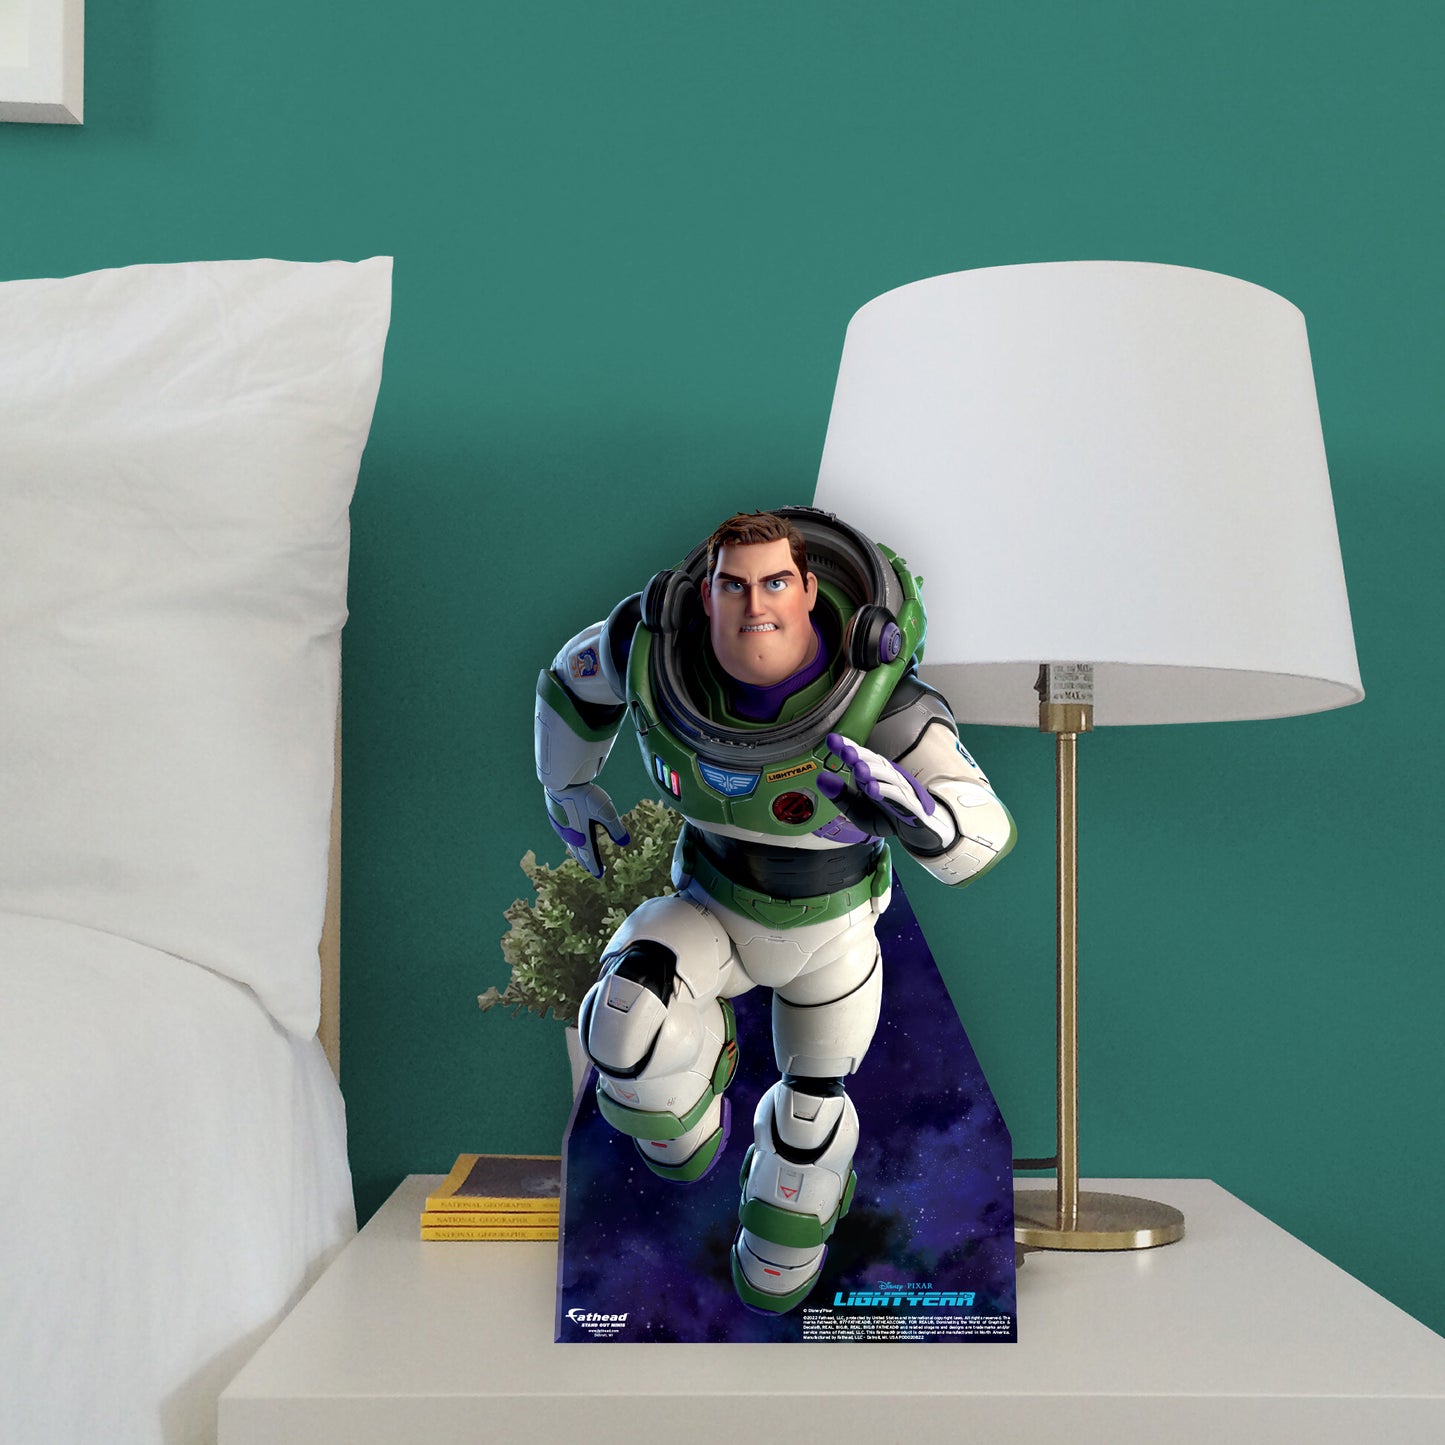 Lightyear: Buzz Lightyear Alpha Suit  Mini   Cardstock Cutout  - Officially Licensed Disney    Stand Out